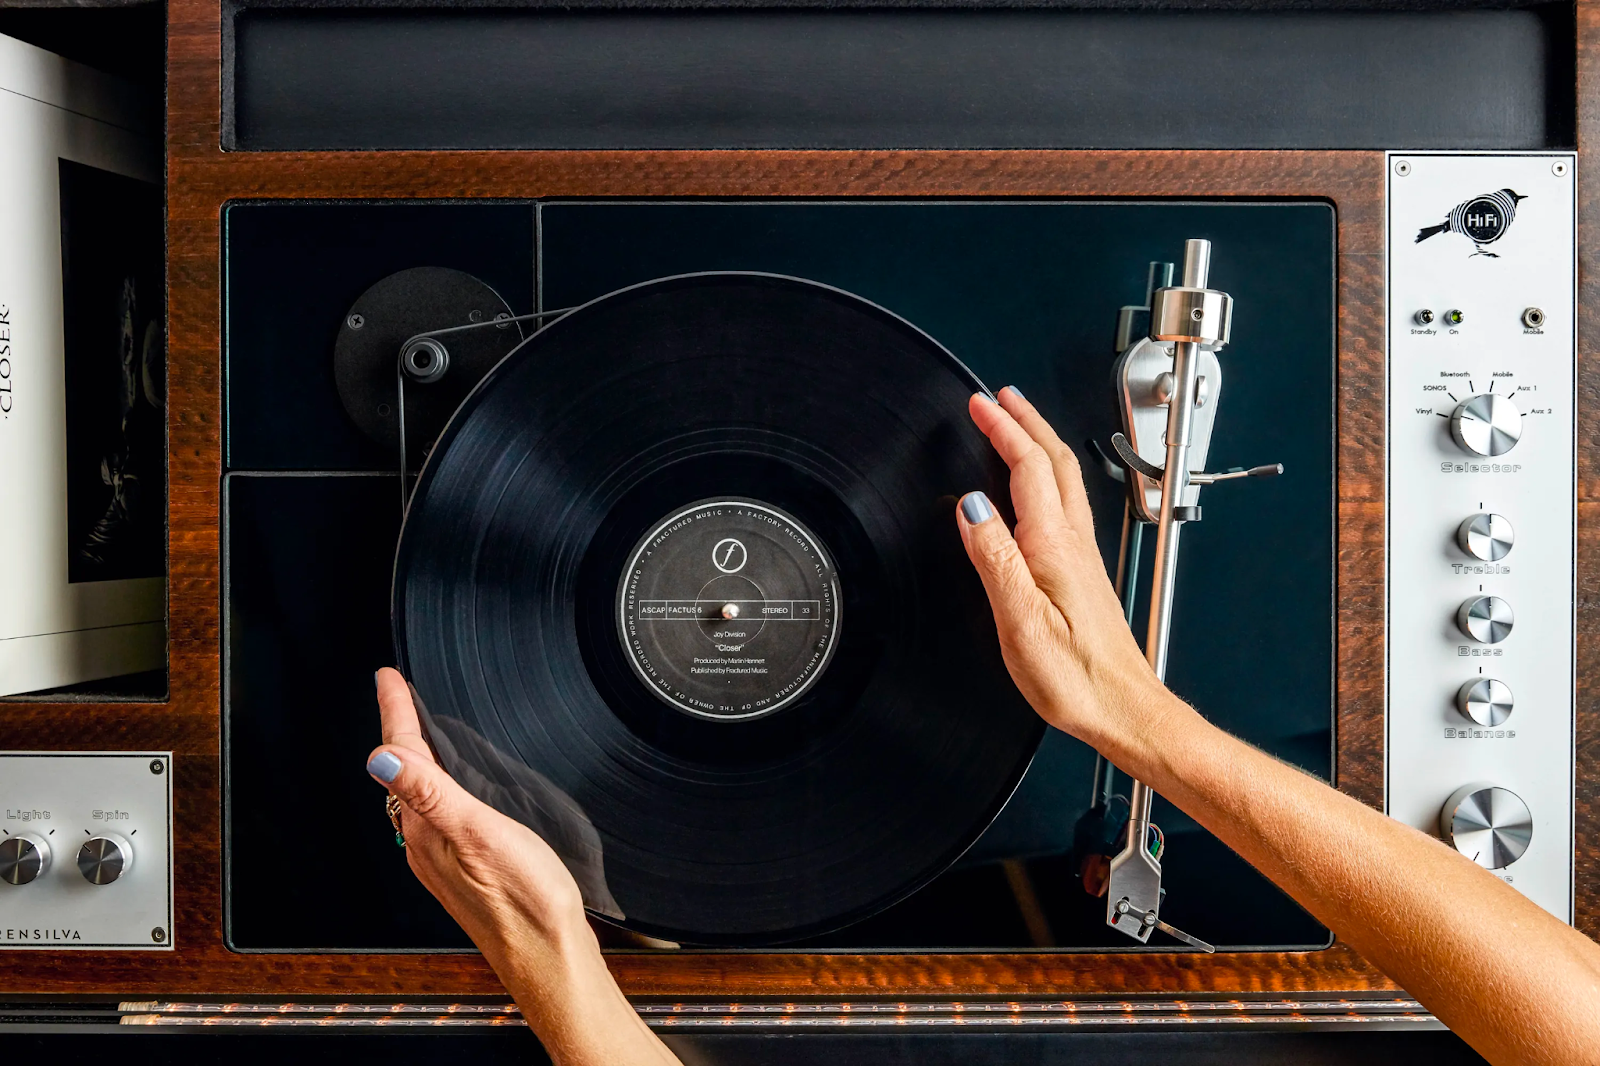 This is how you hold a record